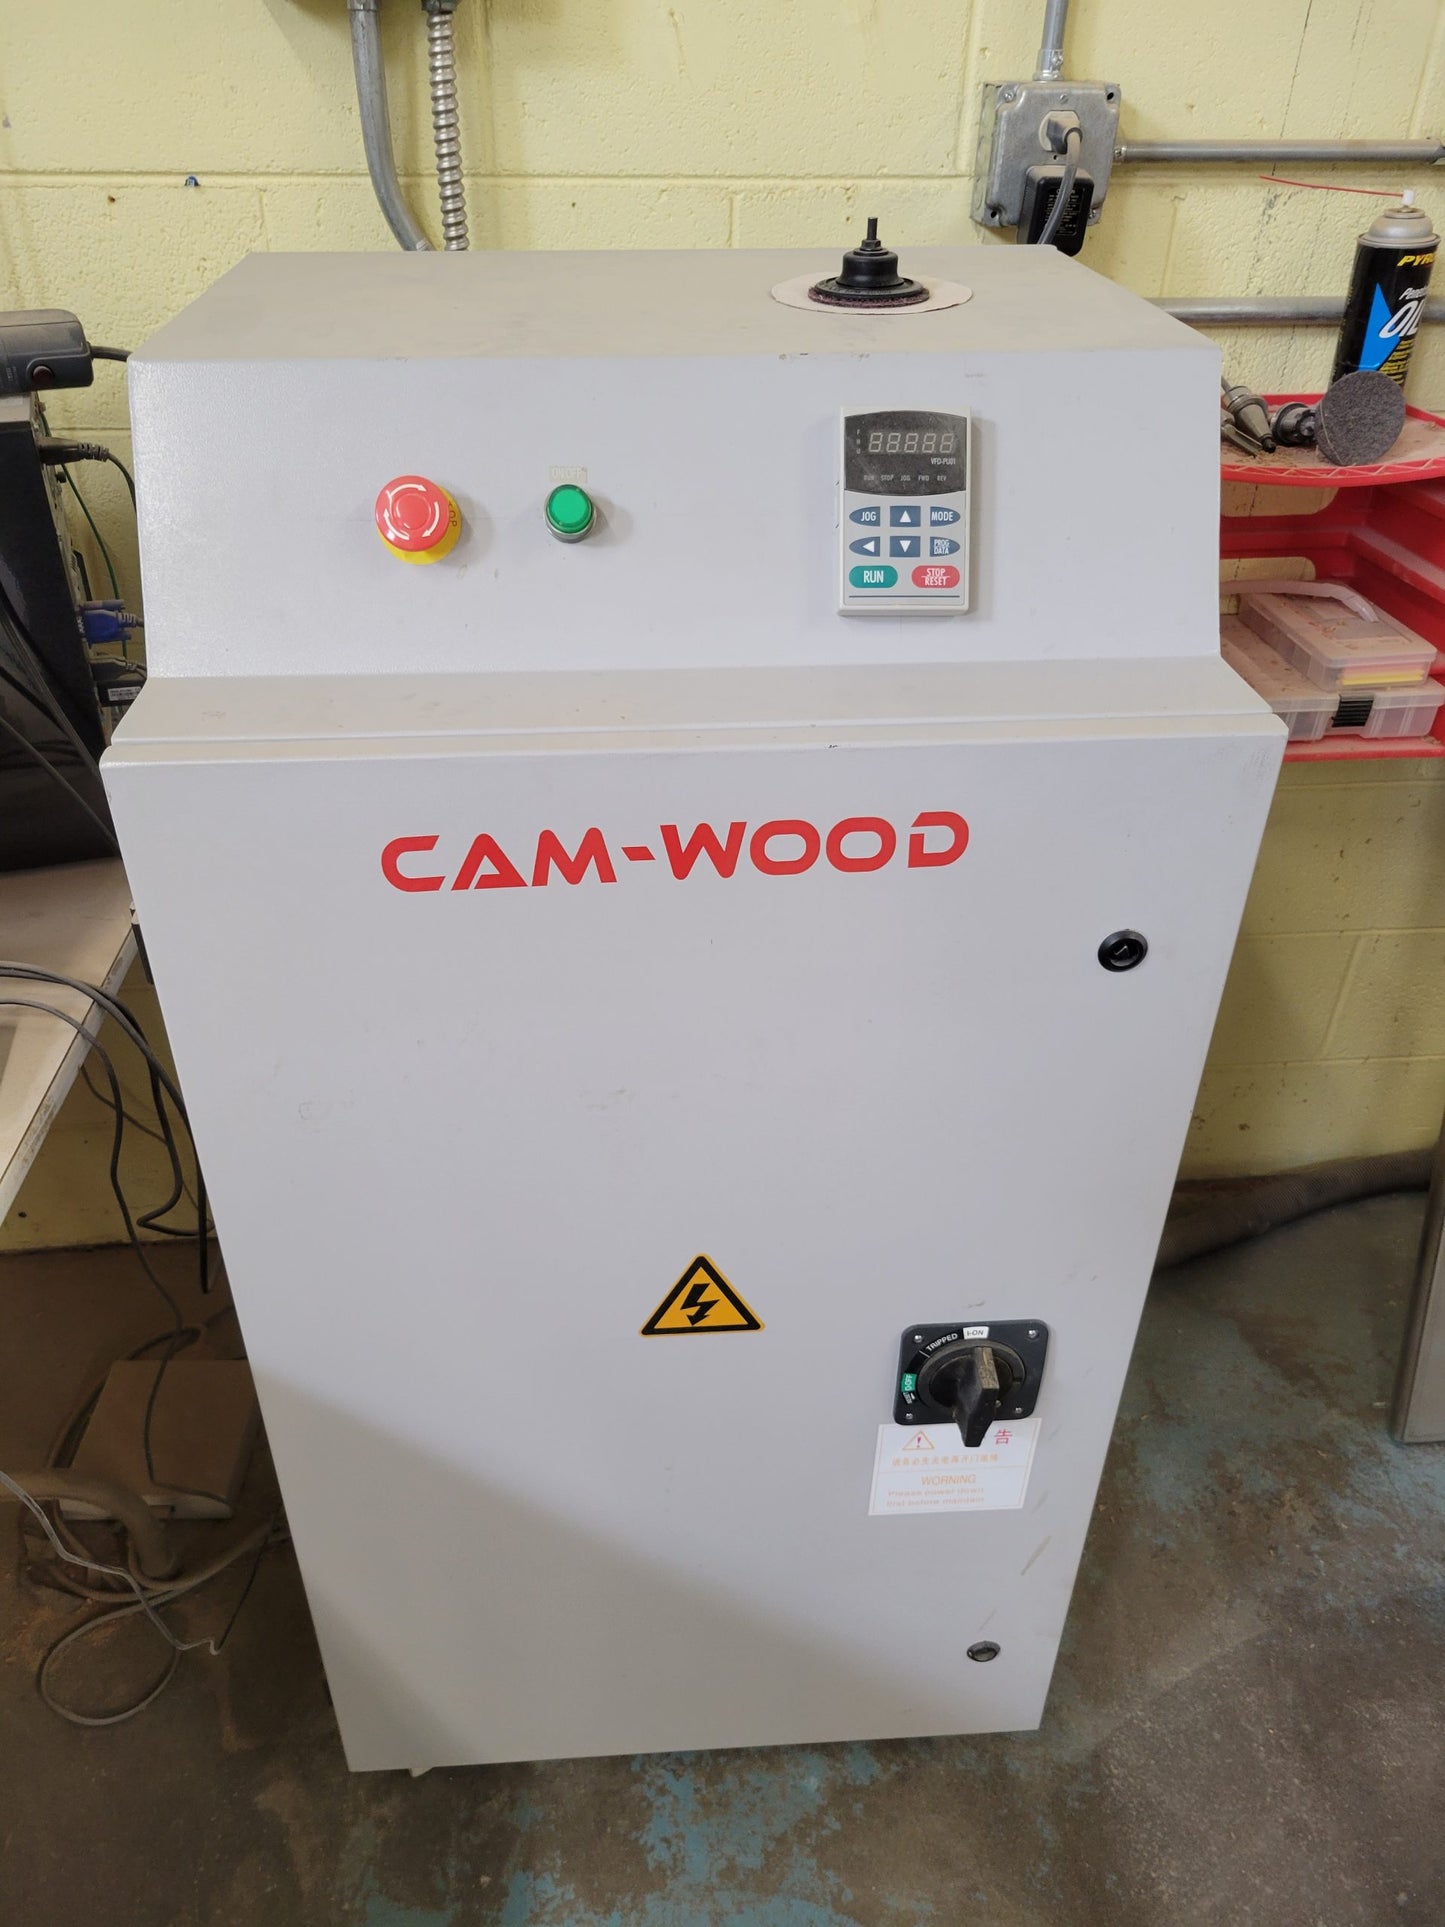 2008 Camwood CNC Router with Pump